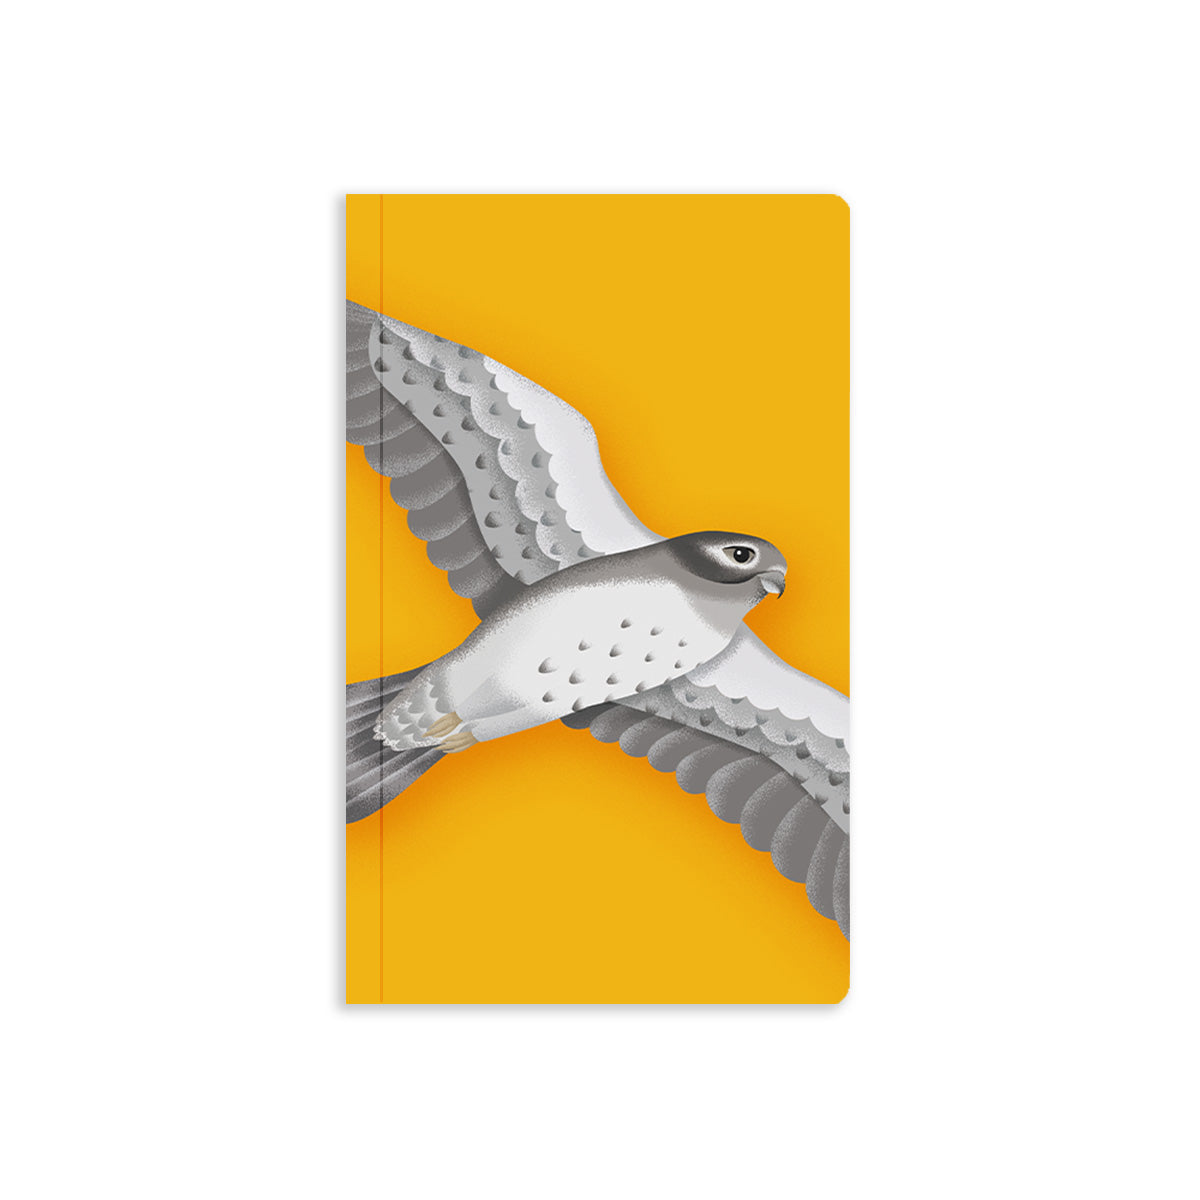 Illustrated gyrfalcon mid-flight on a yellow background